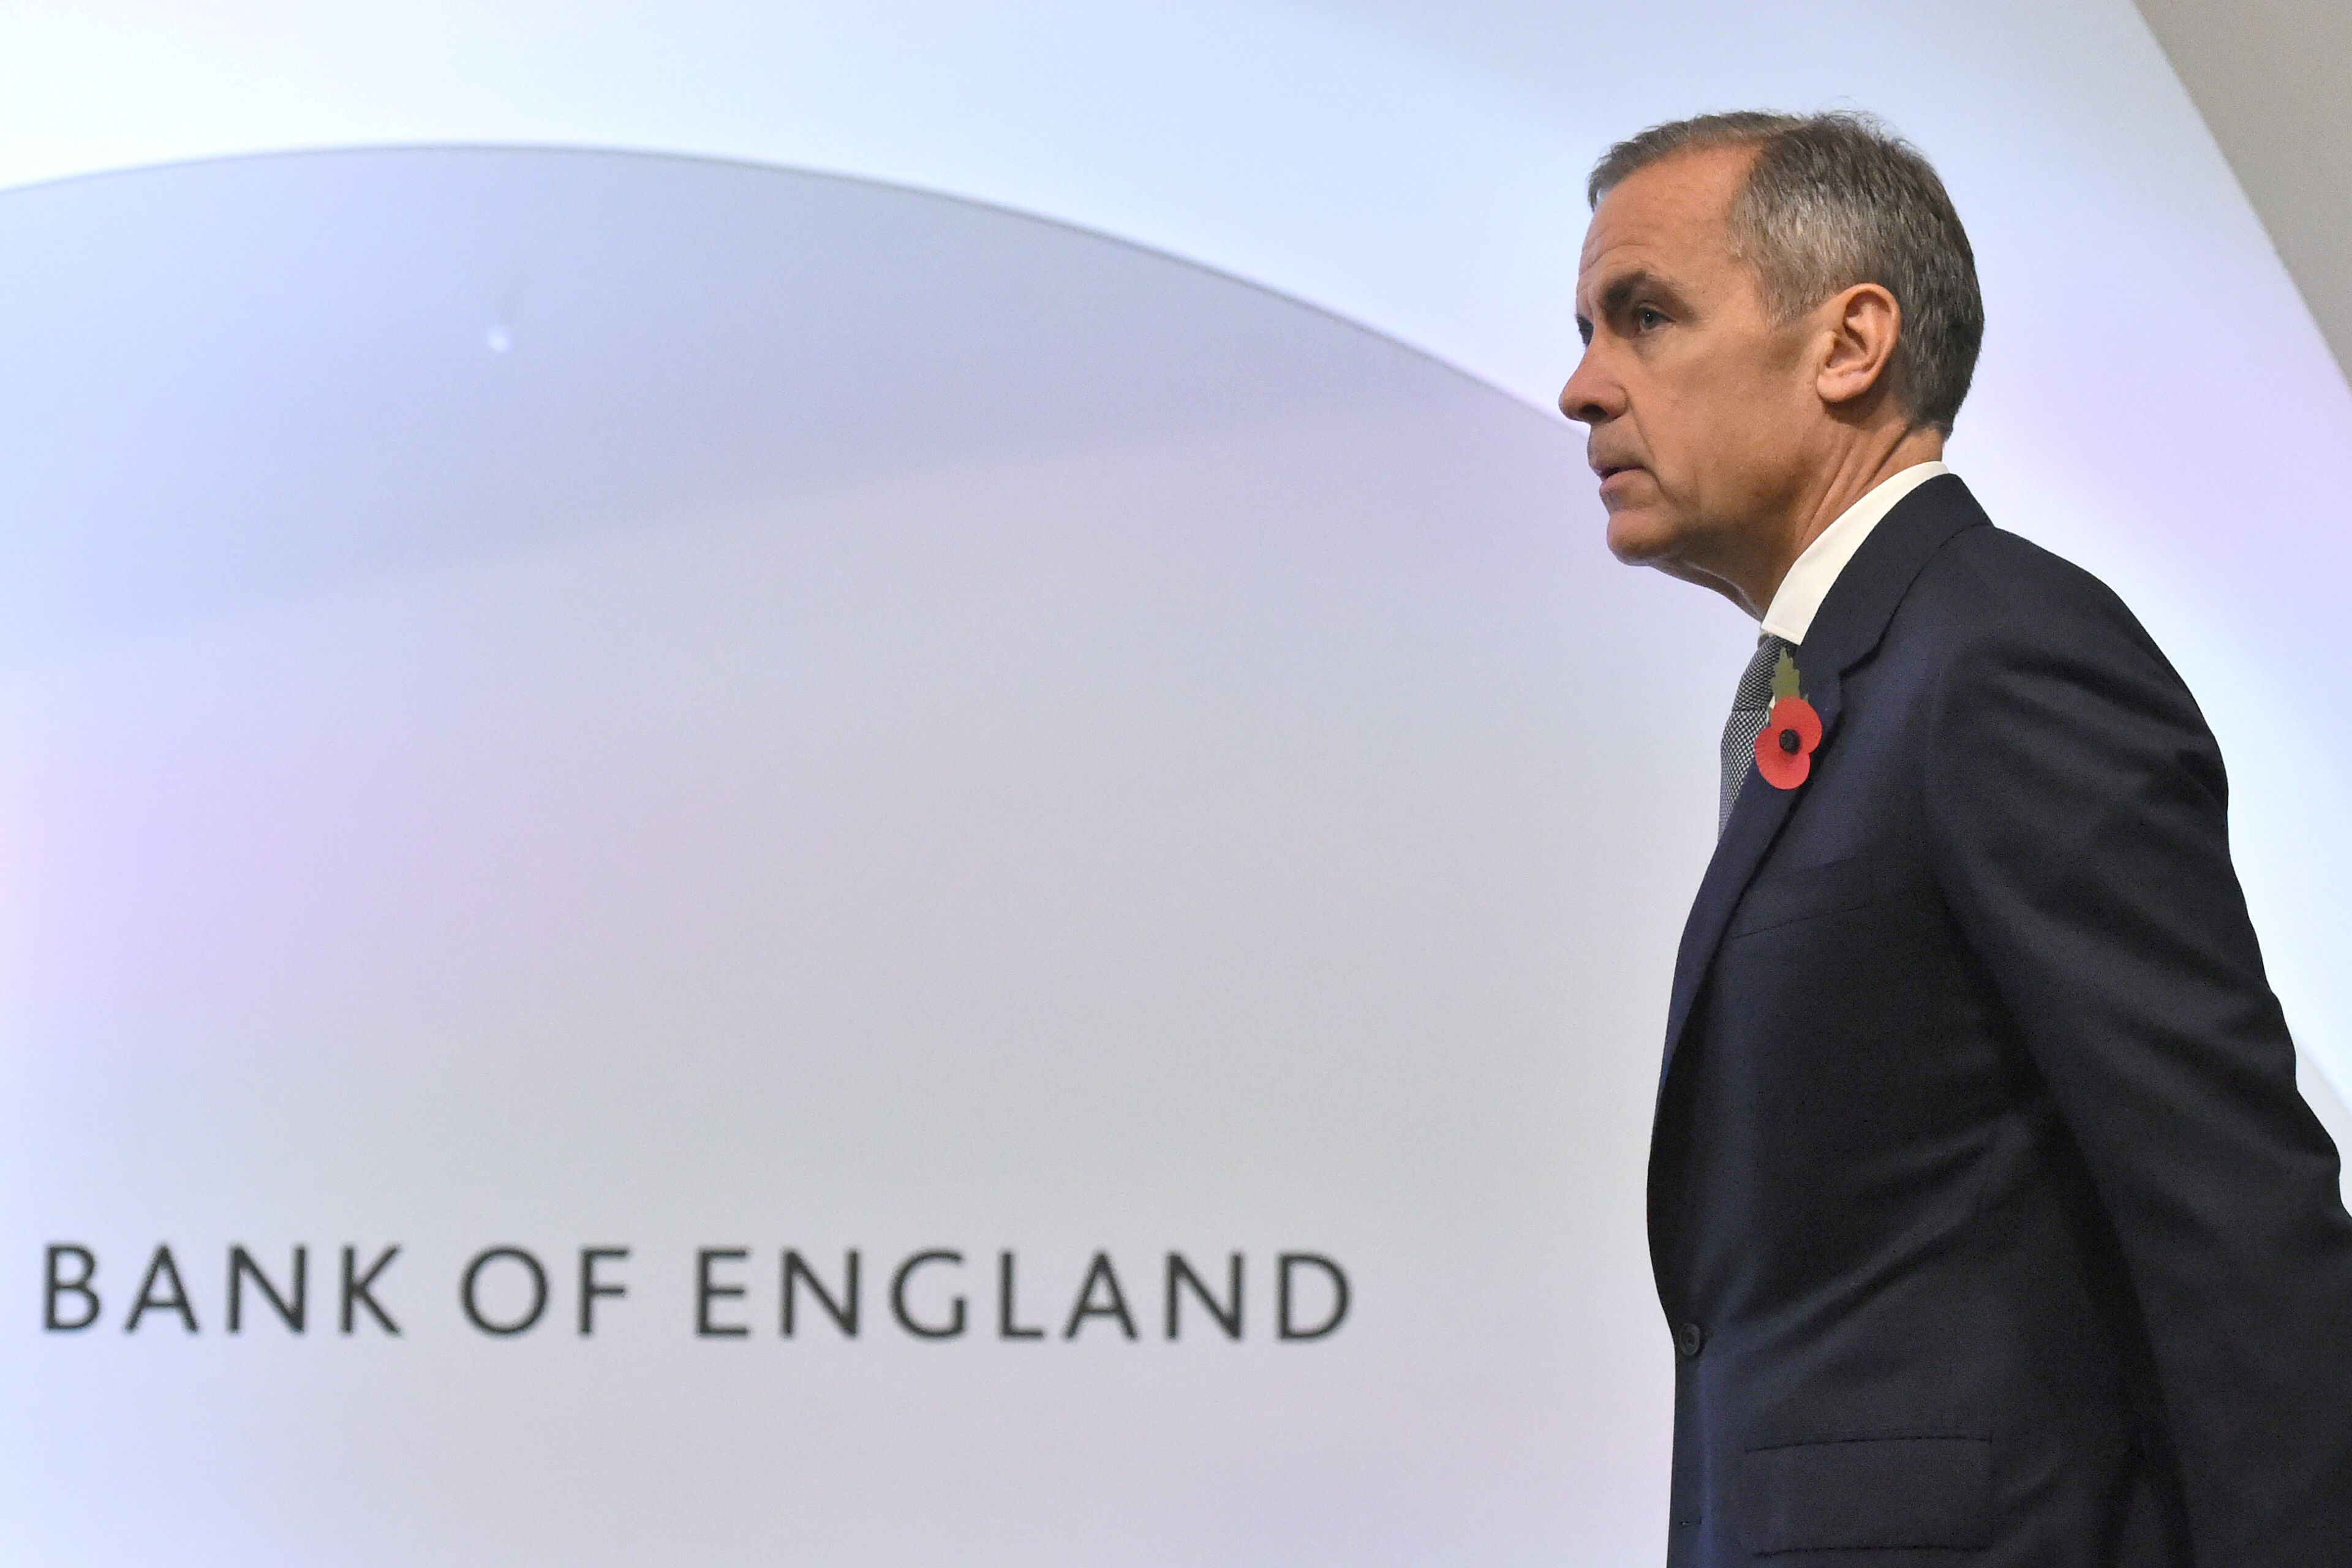 FILE PHOTO: Bank of England Governor Mark Carney attends a Bank of England news conference, in the City of London, Britain November 1, 2018. Kirsty O'Connor/Pool via REUTERS/File Photo